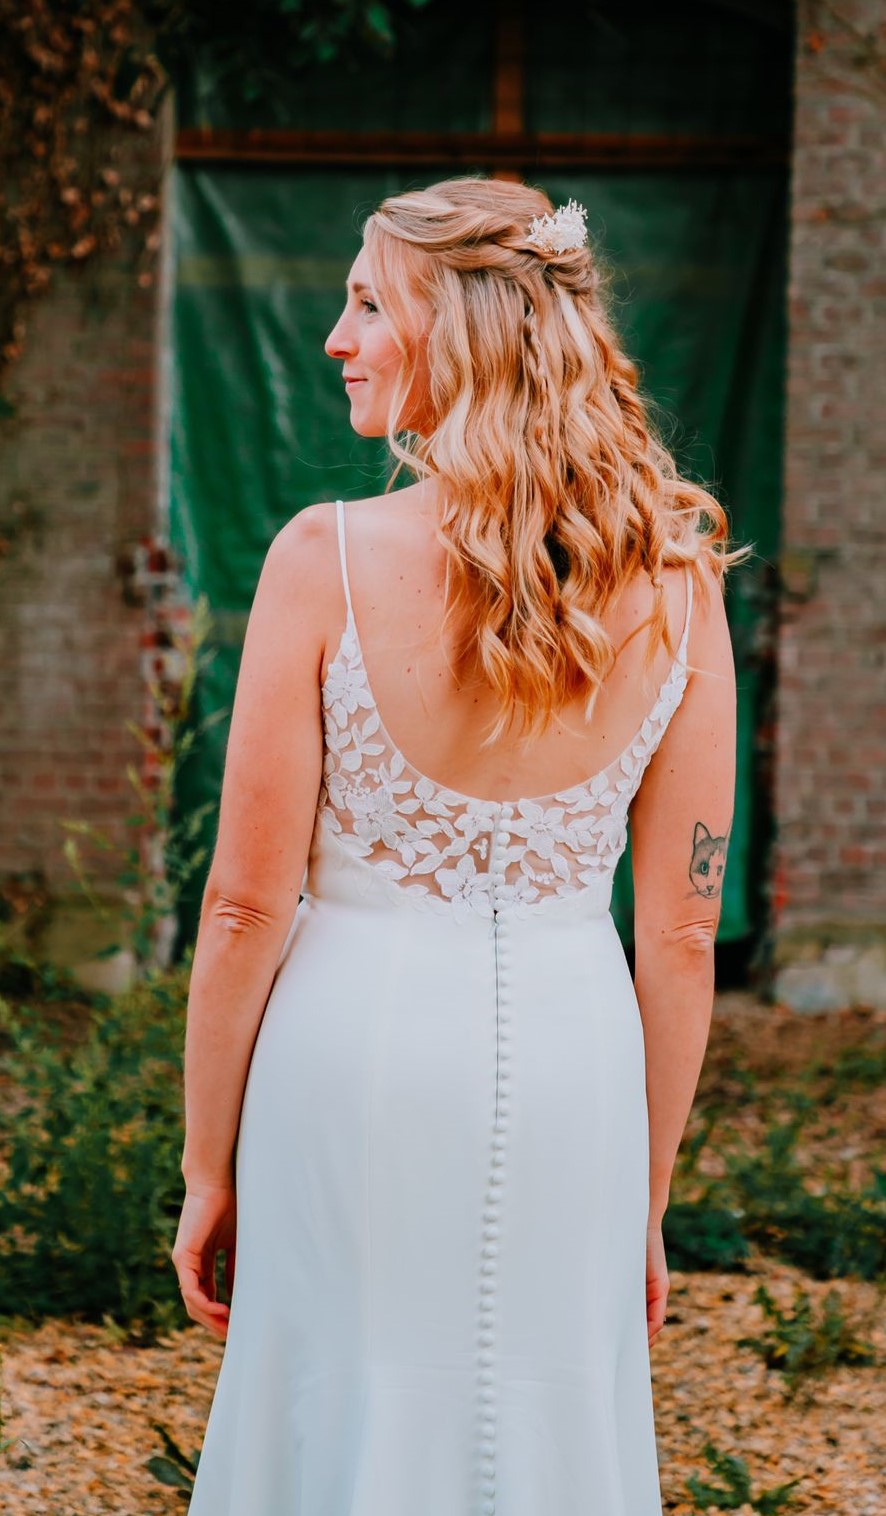 backview of bride with blond curls and white dress looking to the left